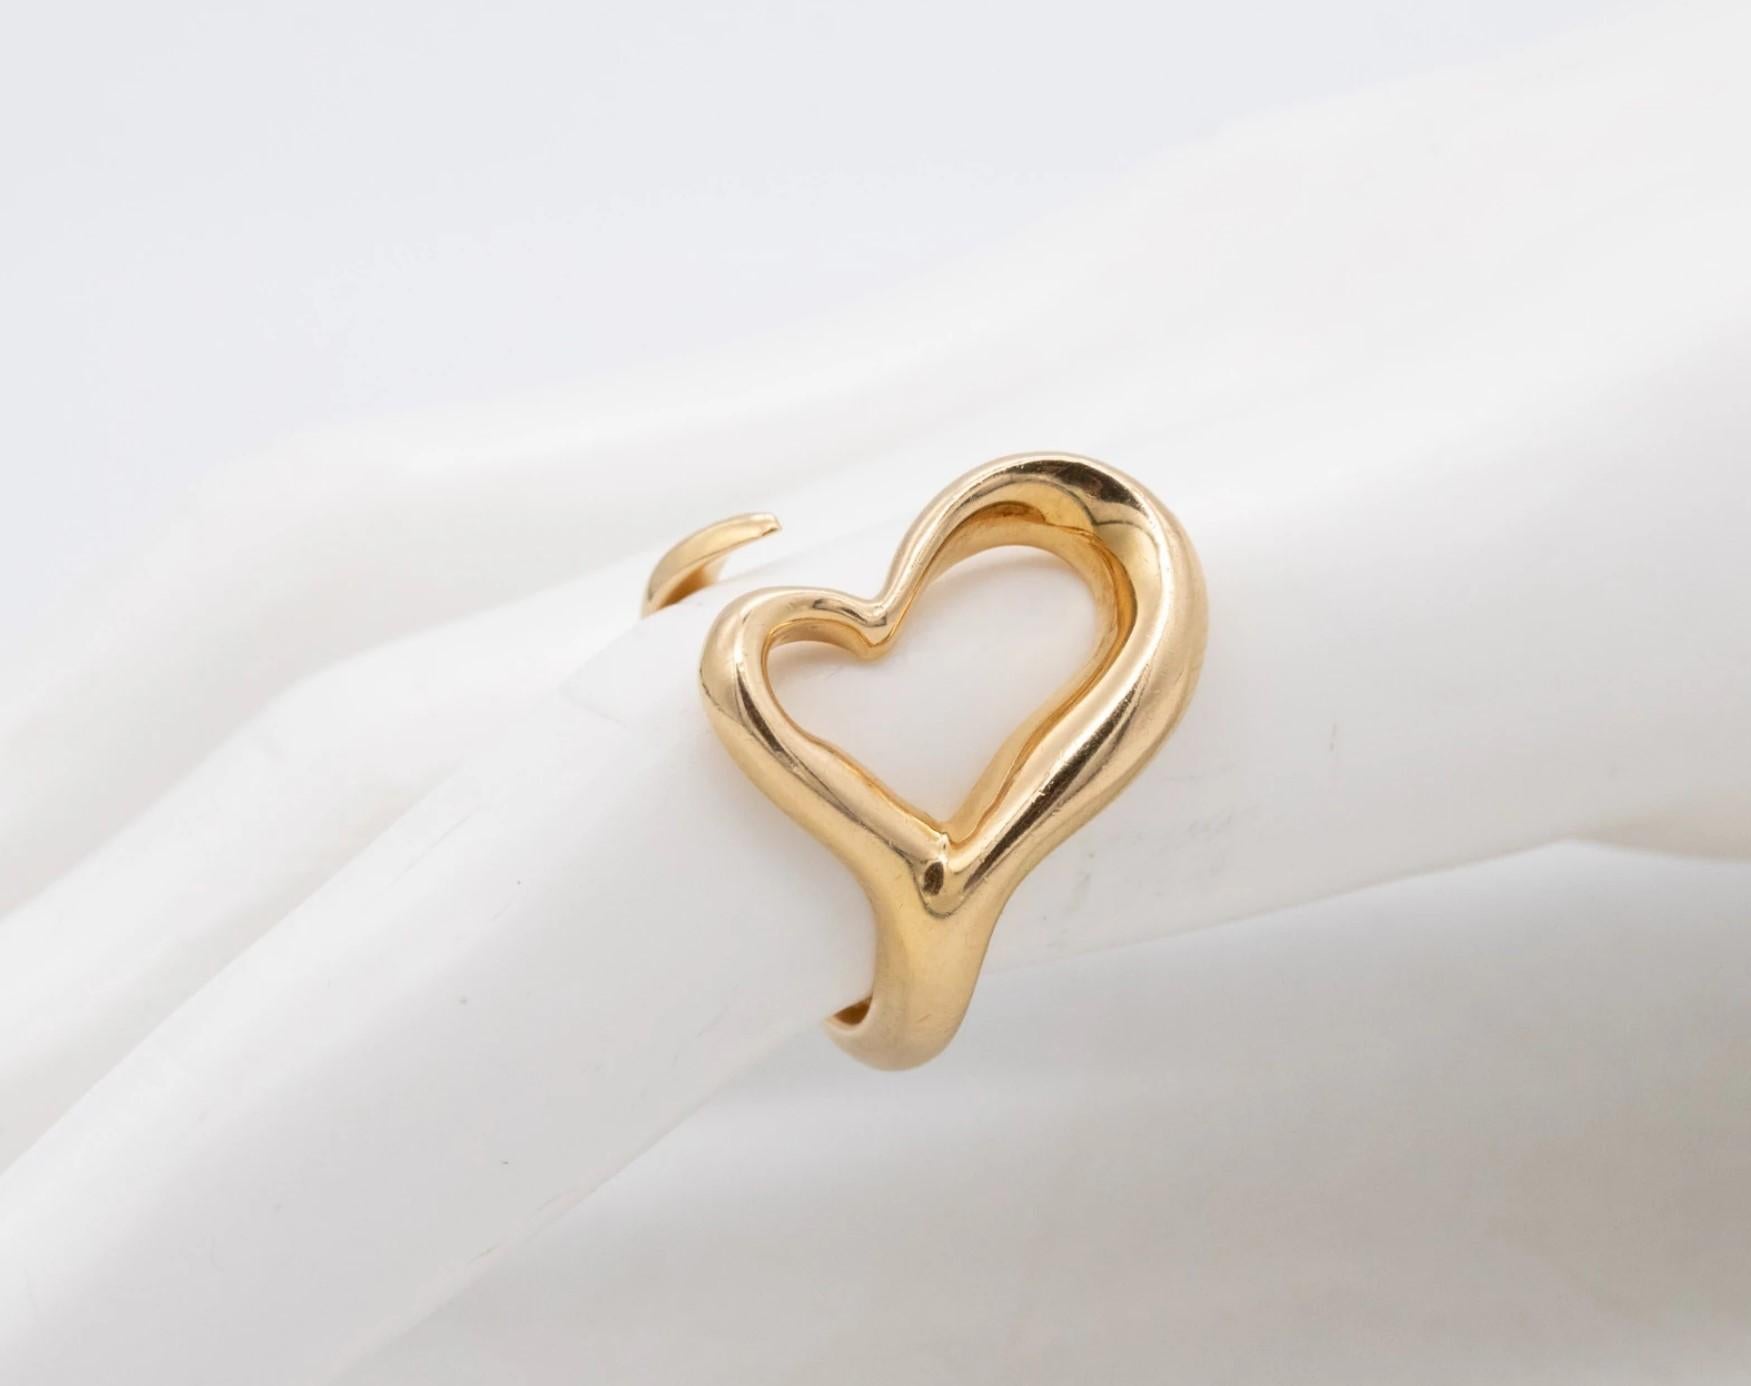 Tiffany & Co. 1980 Elsa Peretti Open Heart Ring Solid 18Kt Gold Size 6-6.5 1